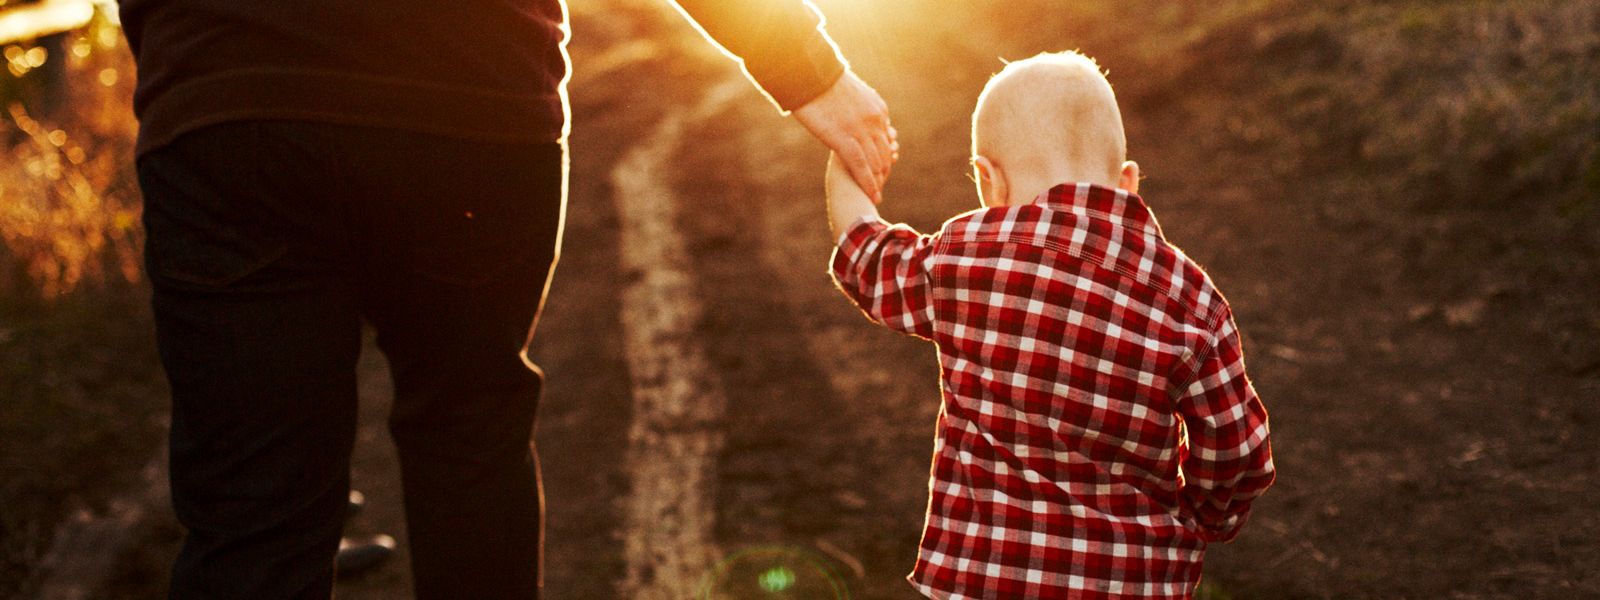 How a Father Can Model God’s Love and Justice 